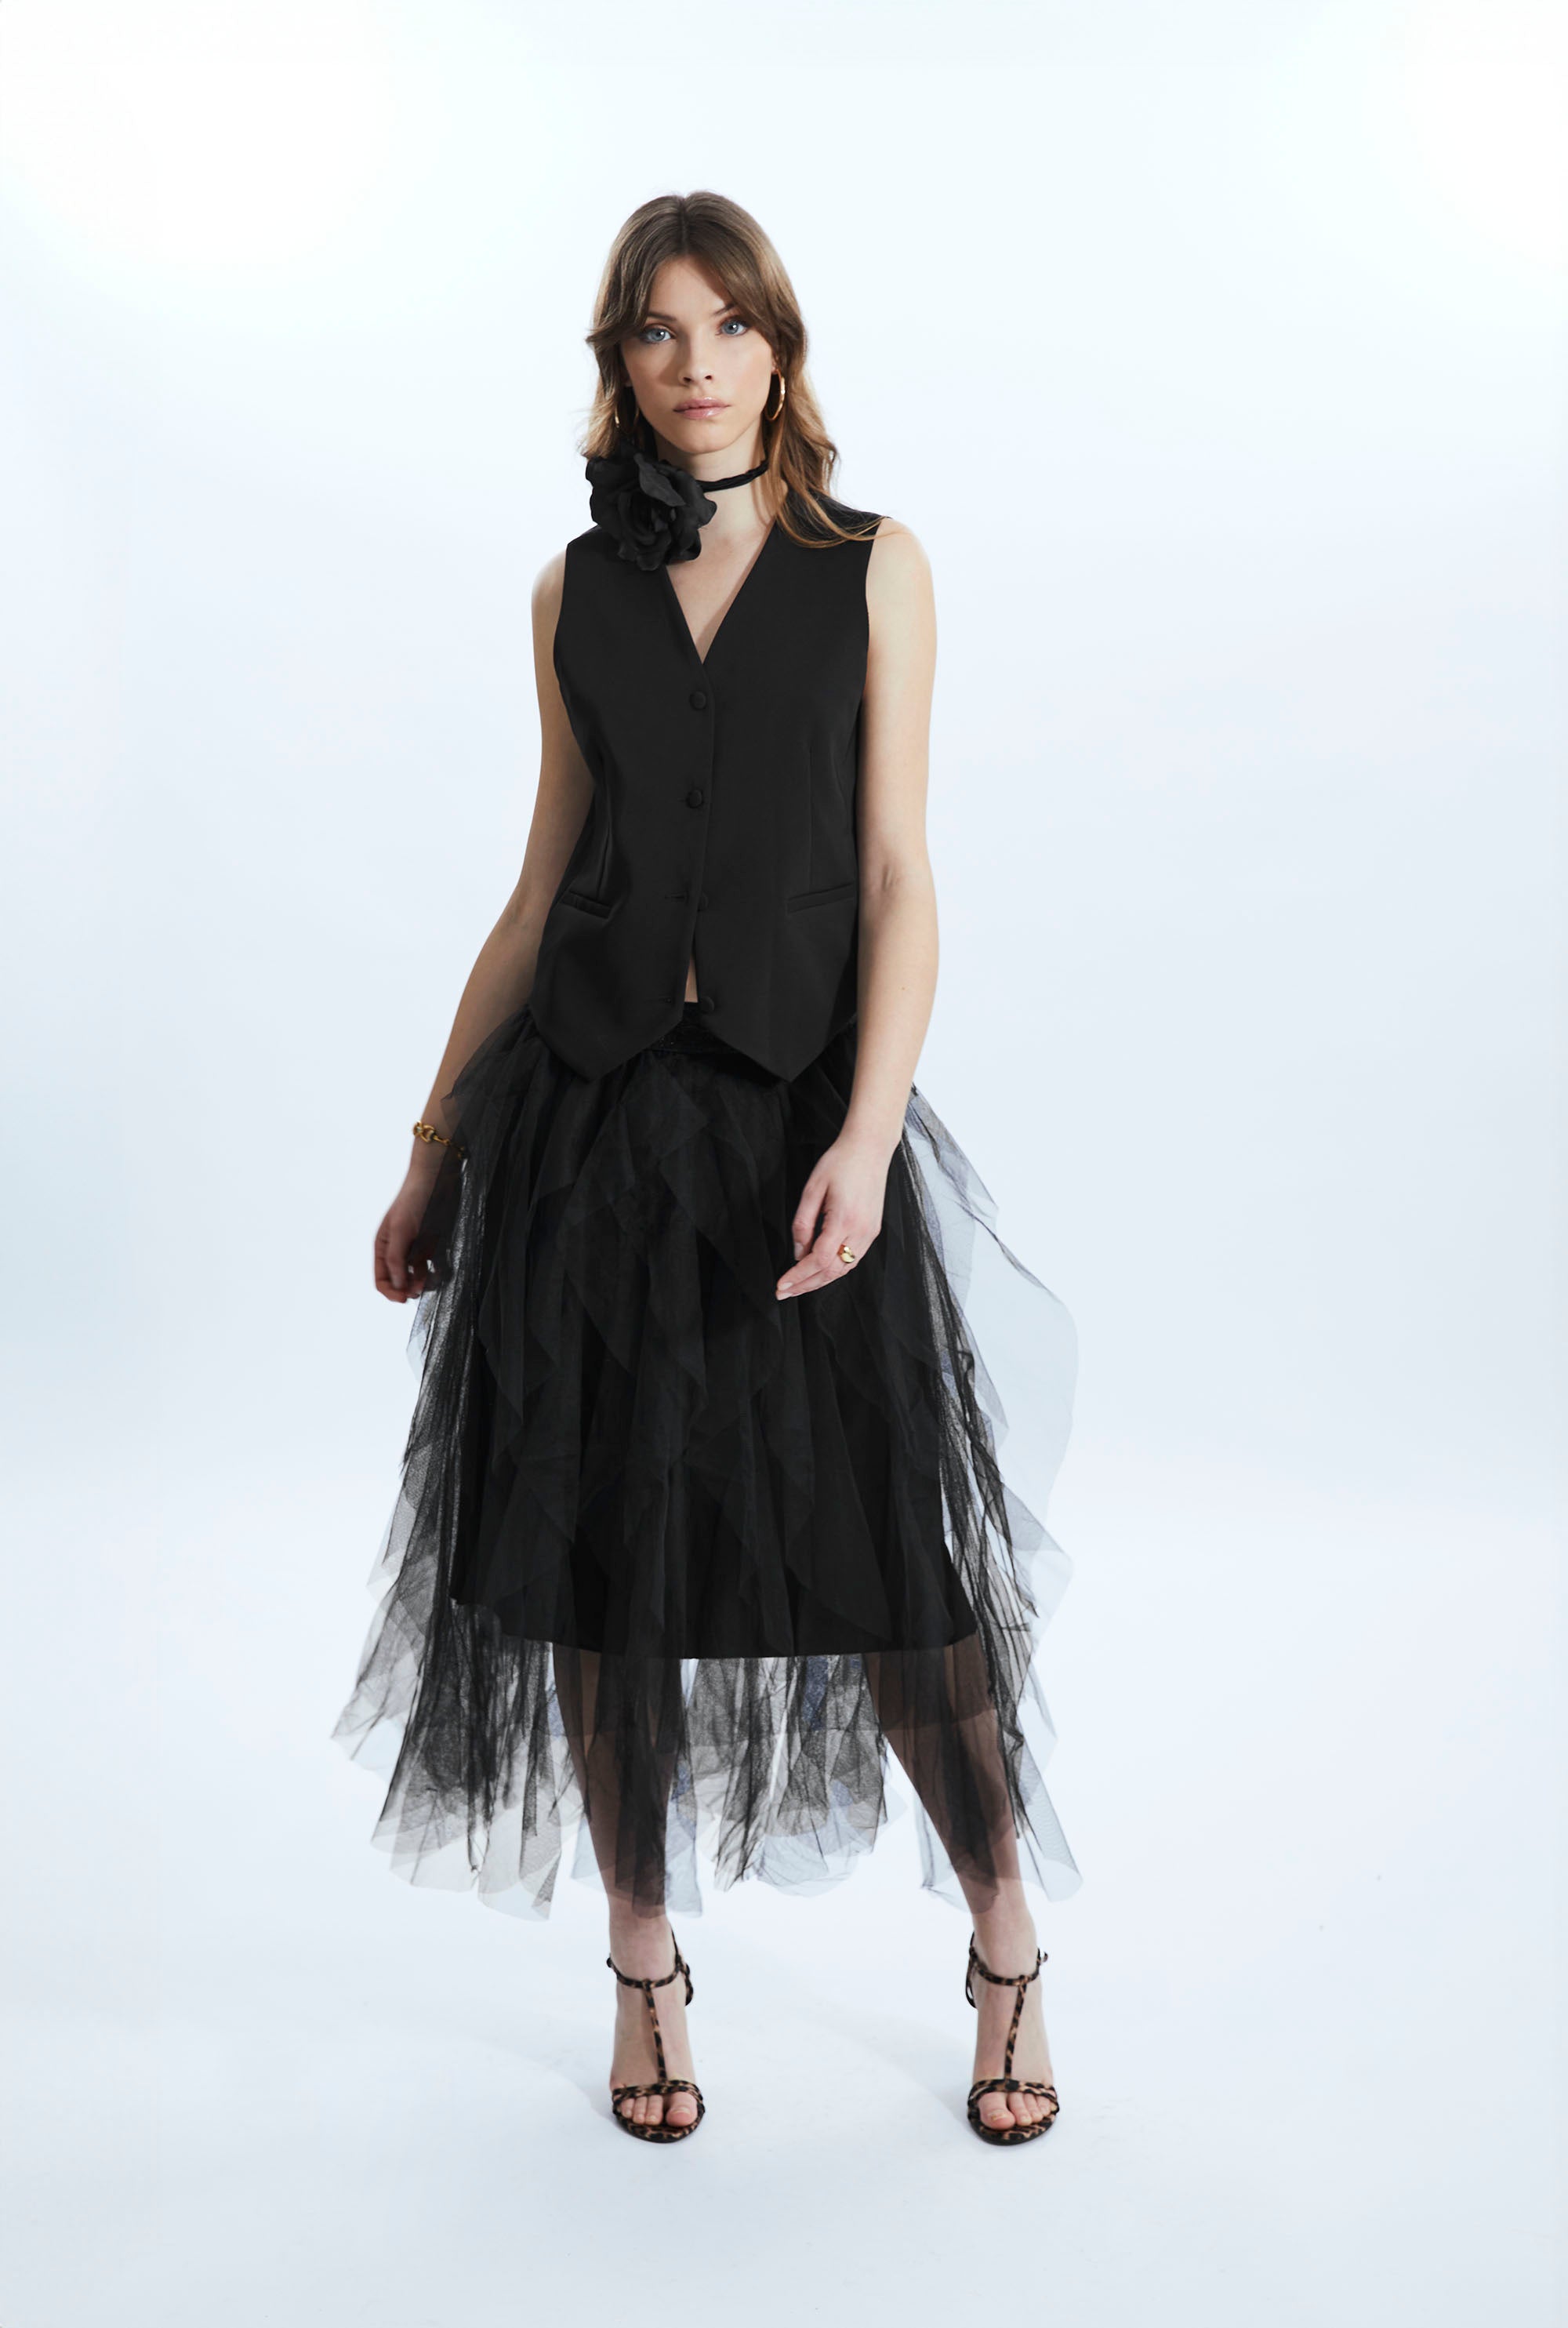 Black Organza Tiered Carrie Skirt